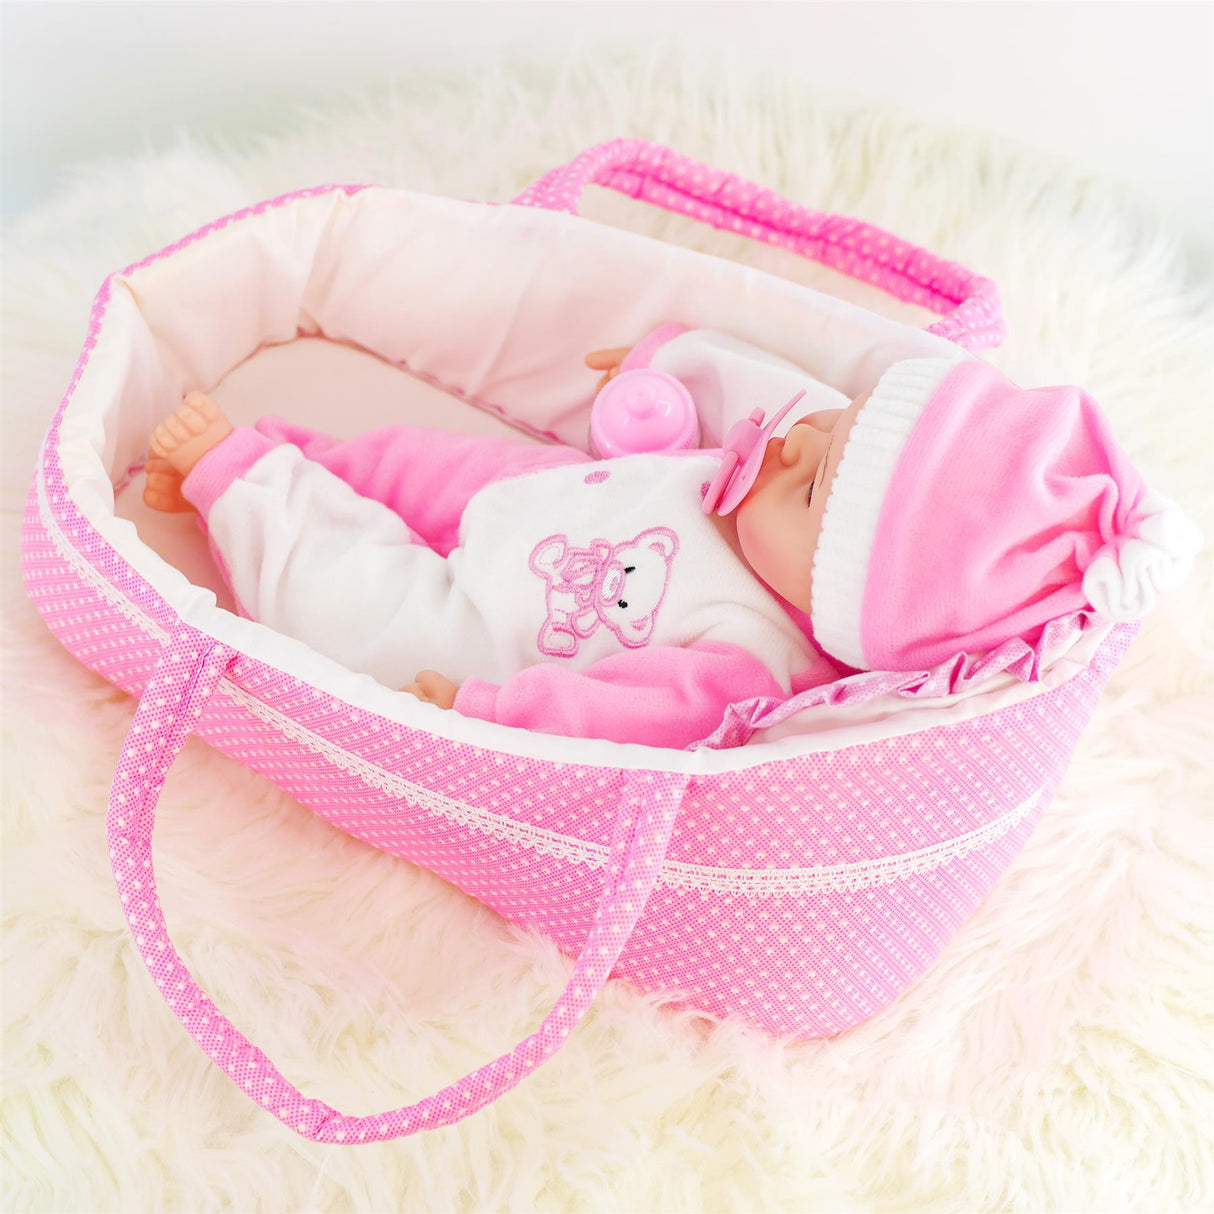 BiBi Baby Doll in Carry Cot (38 cm / 15") by The Magic Toy Shop - UKBuyZone